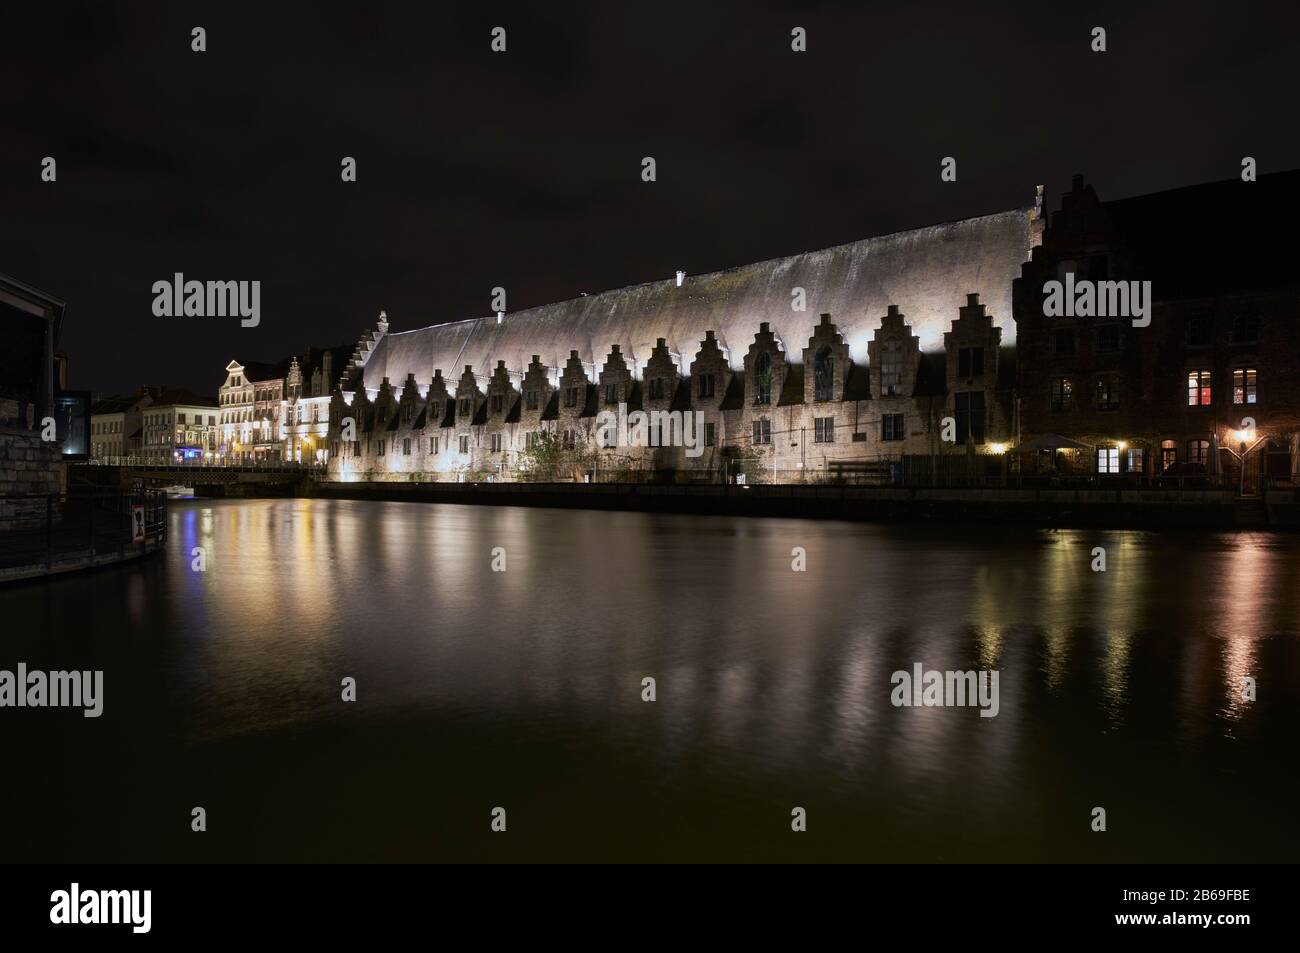 Groot Vleeshuis,(Butchers' Hall) Ghent, Belgium. With reflections in River Leie Stock Photo